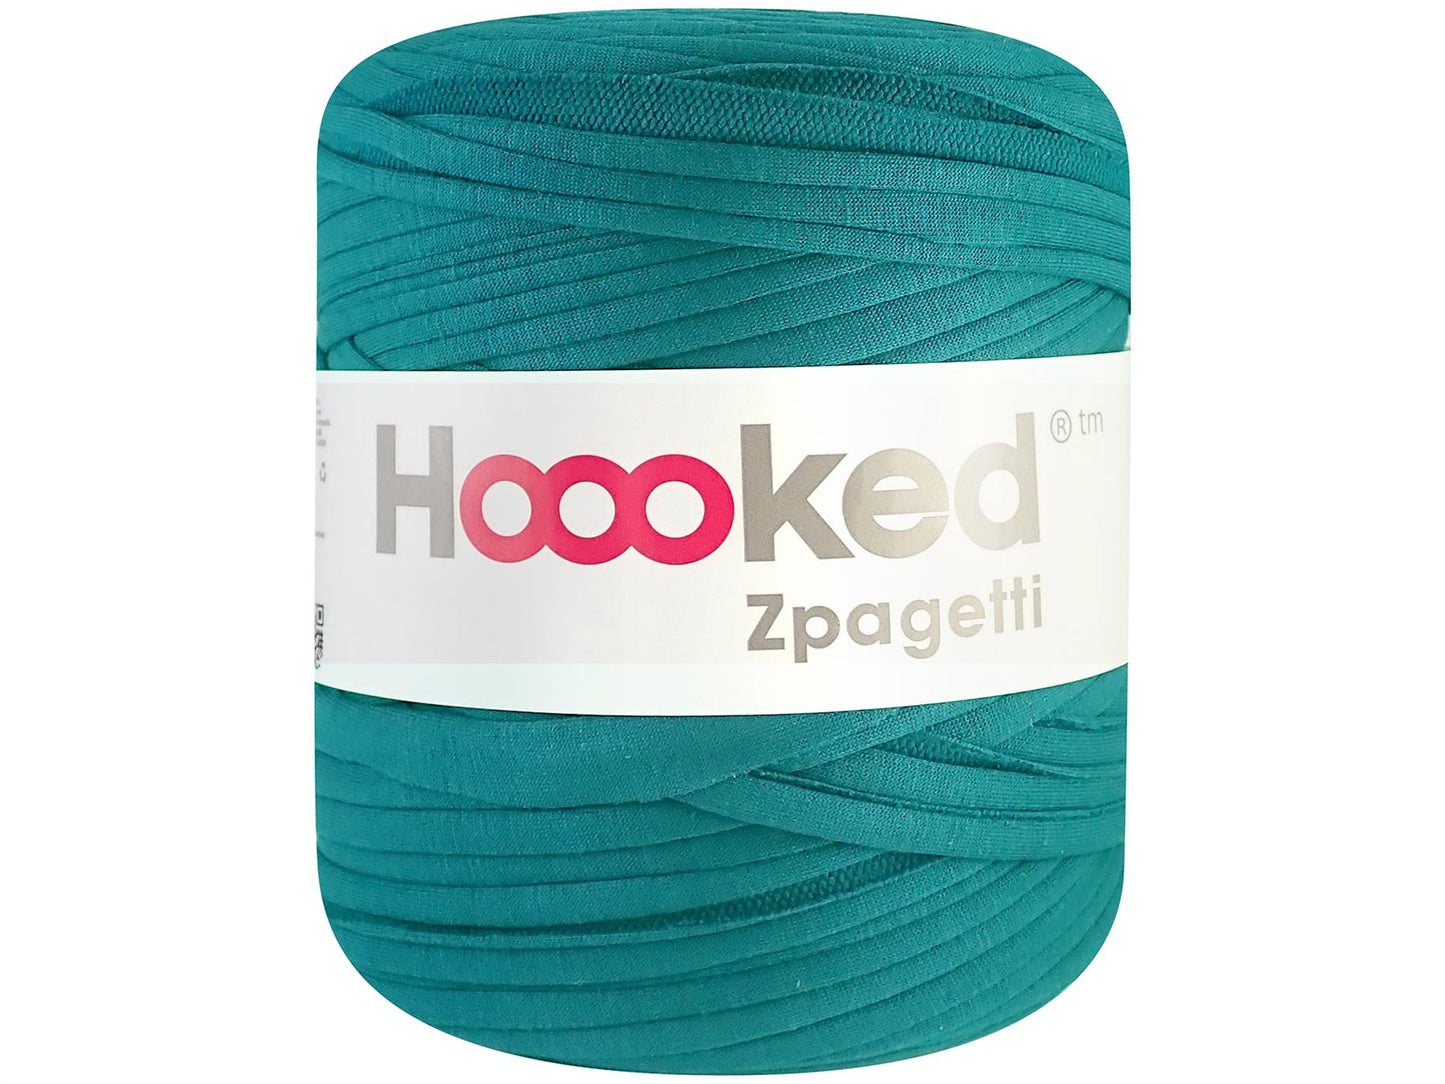 Hoooked Zpagetti Teal Green Cotton T-Shirt Yarn - 120M 700g